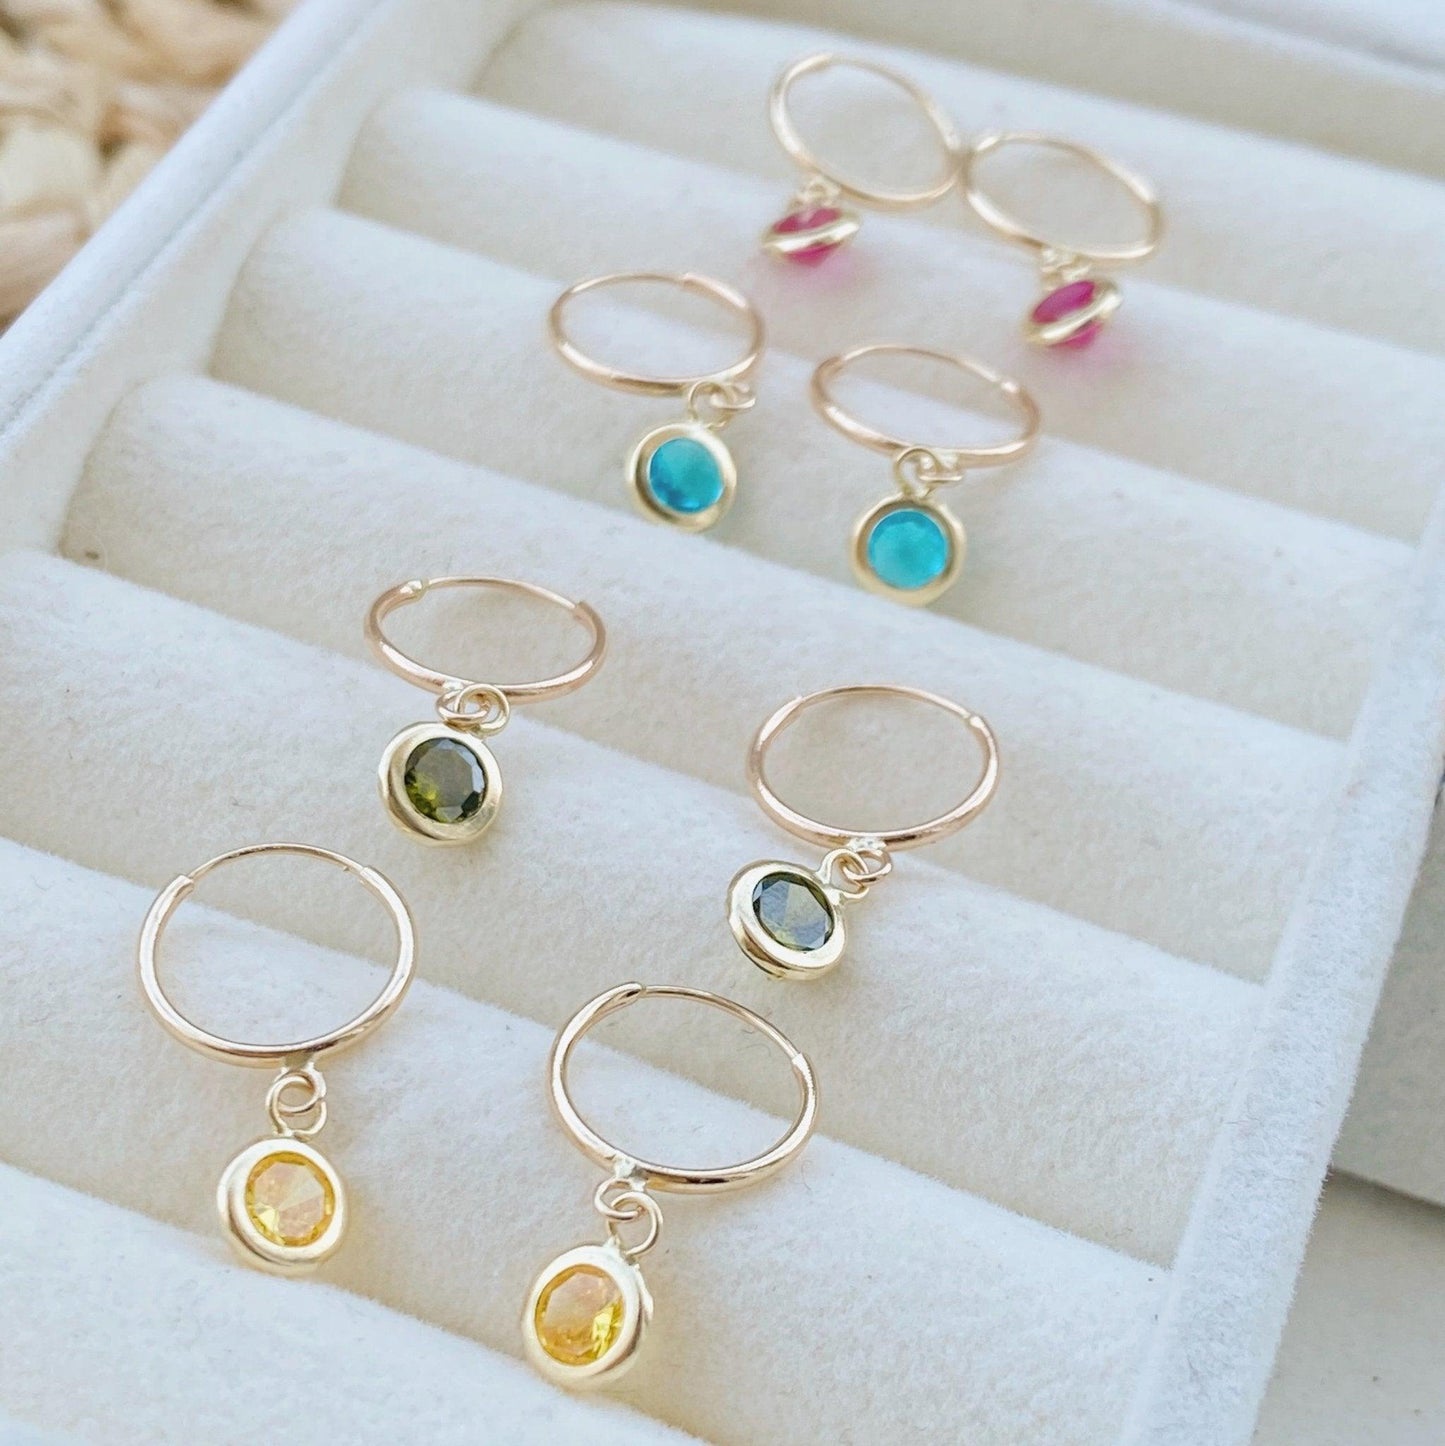 These gold huggie hoop earrings are a simple, yet classy piece of jewelry. They are easy and comfortable to wear, and make a beautiful statement.